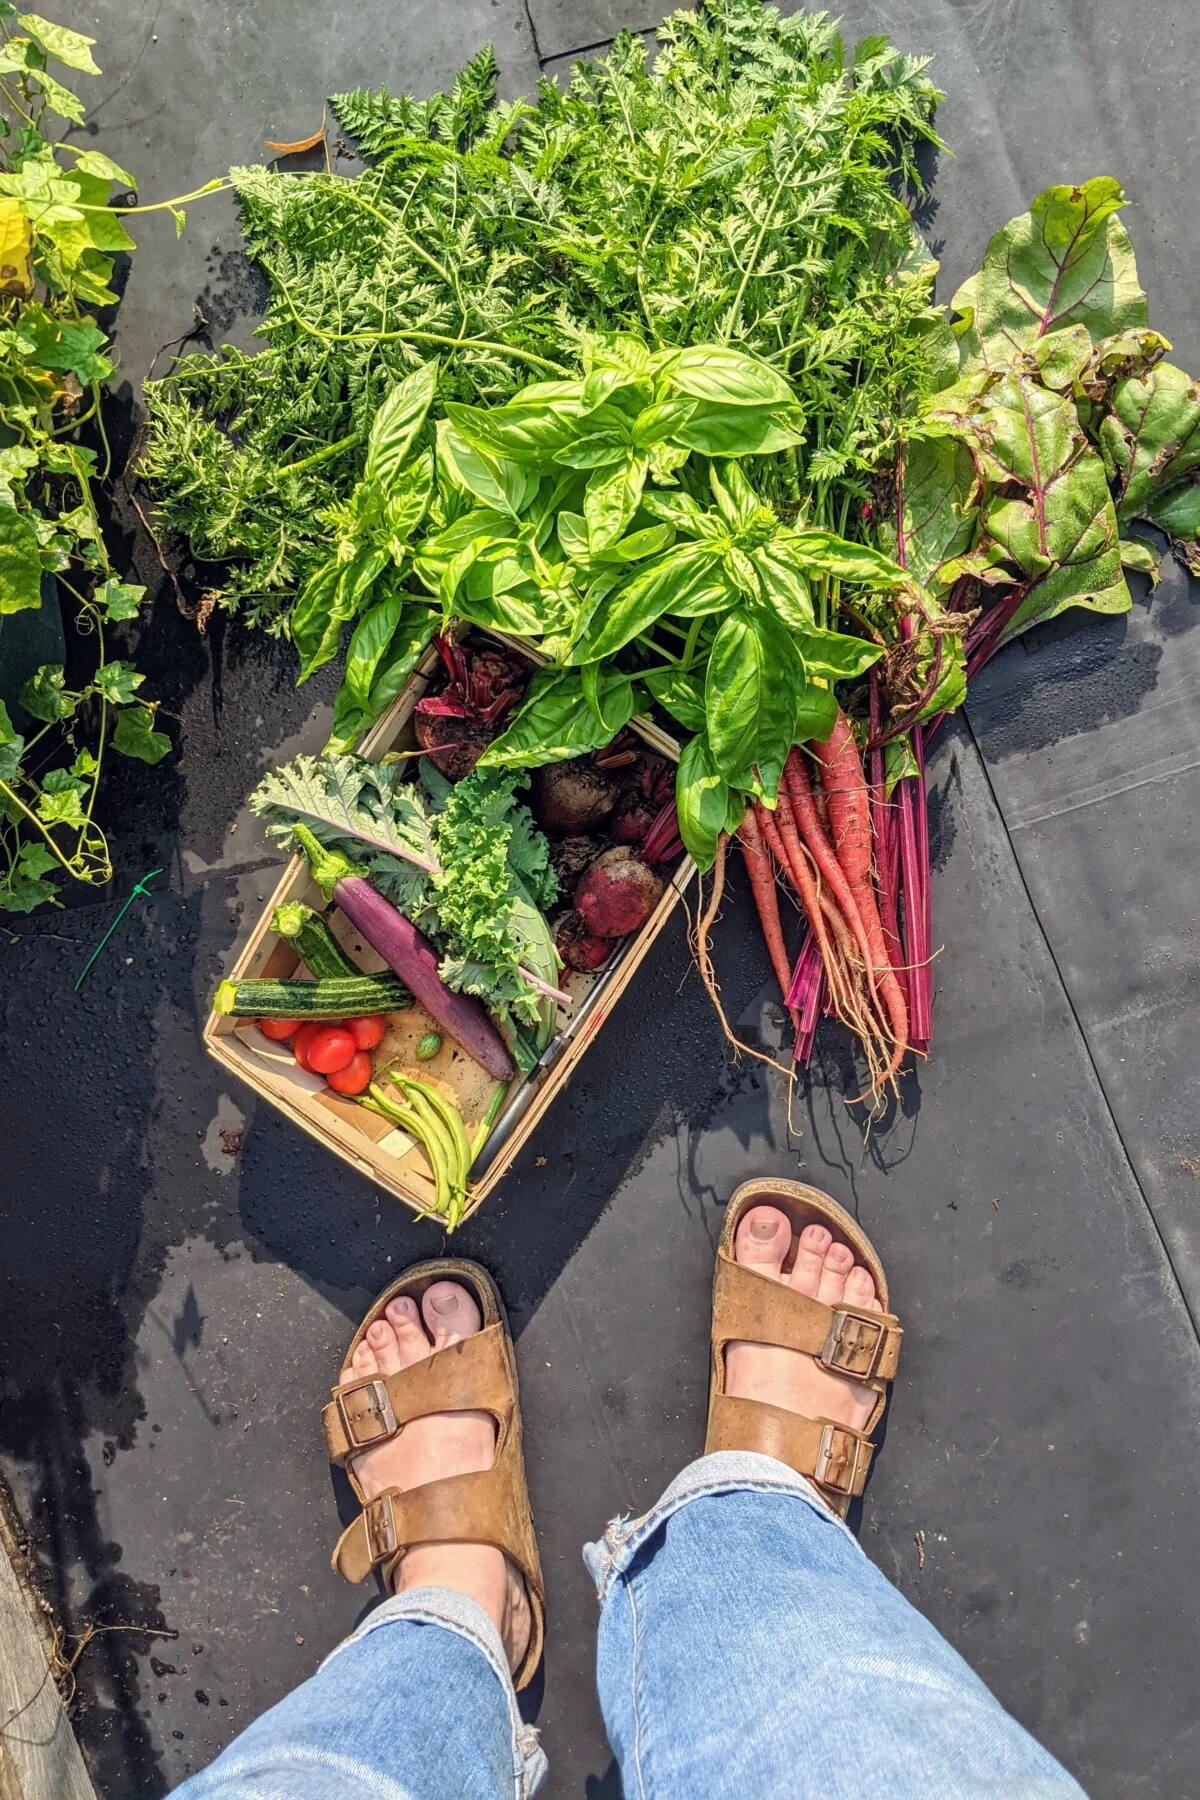 Basket of produce and woman's feet